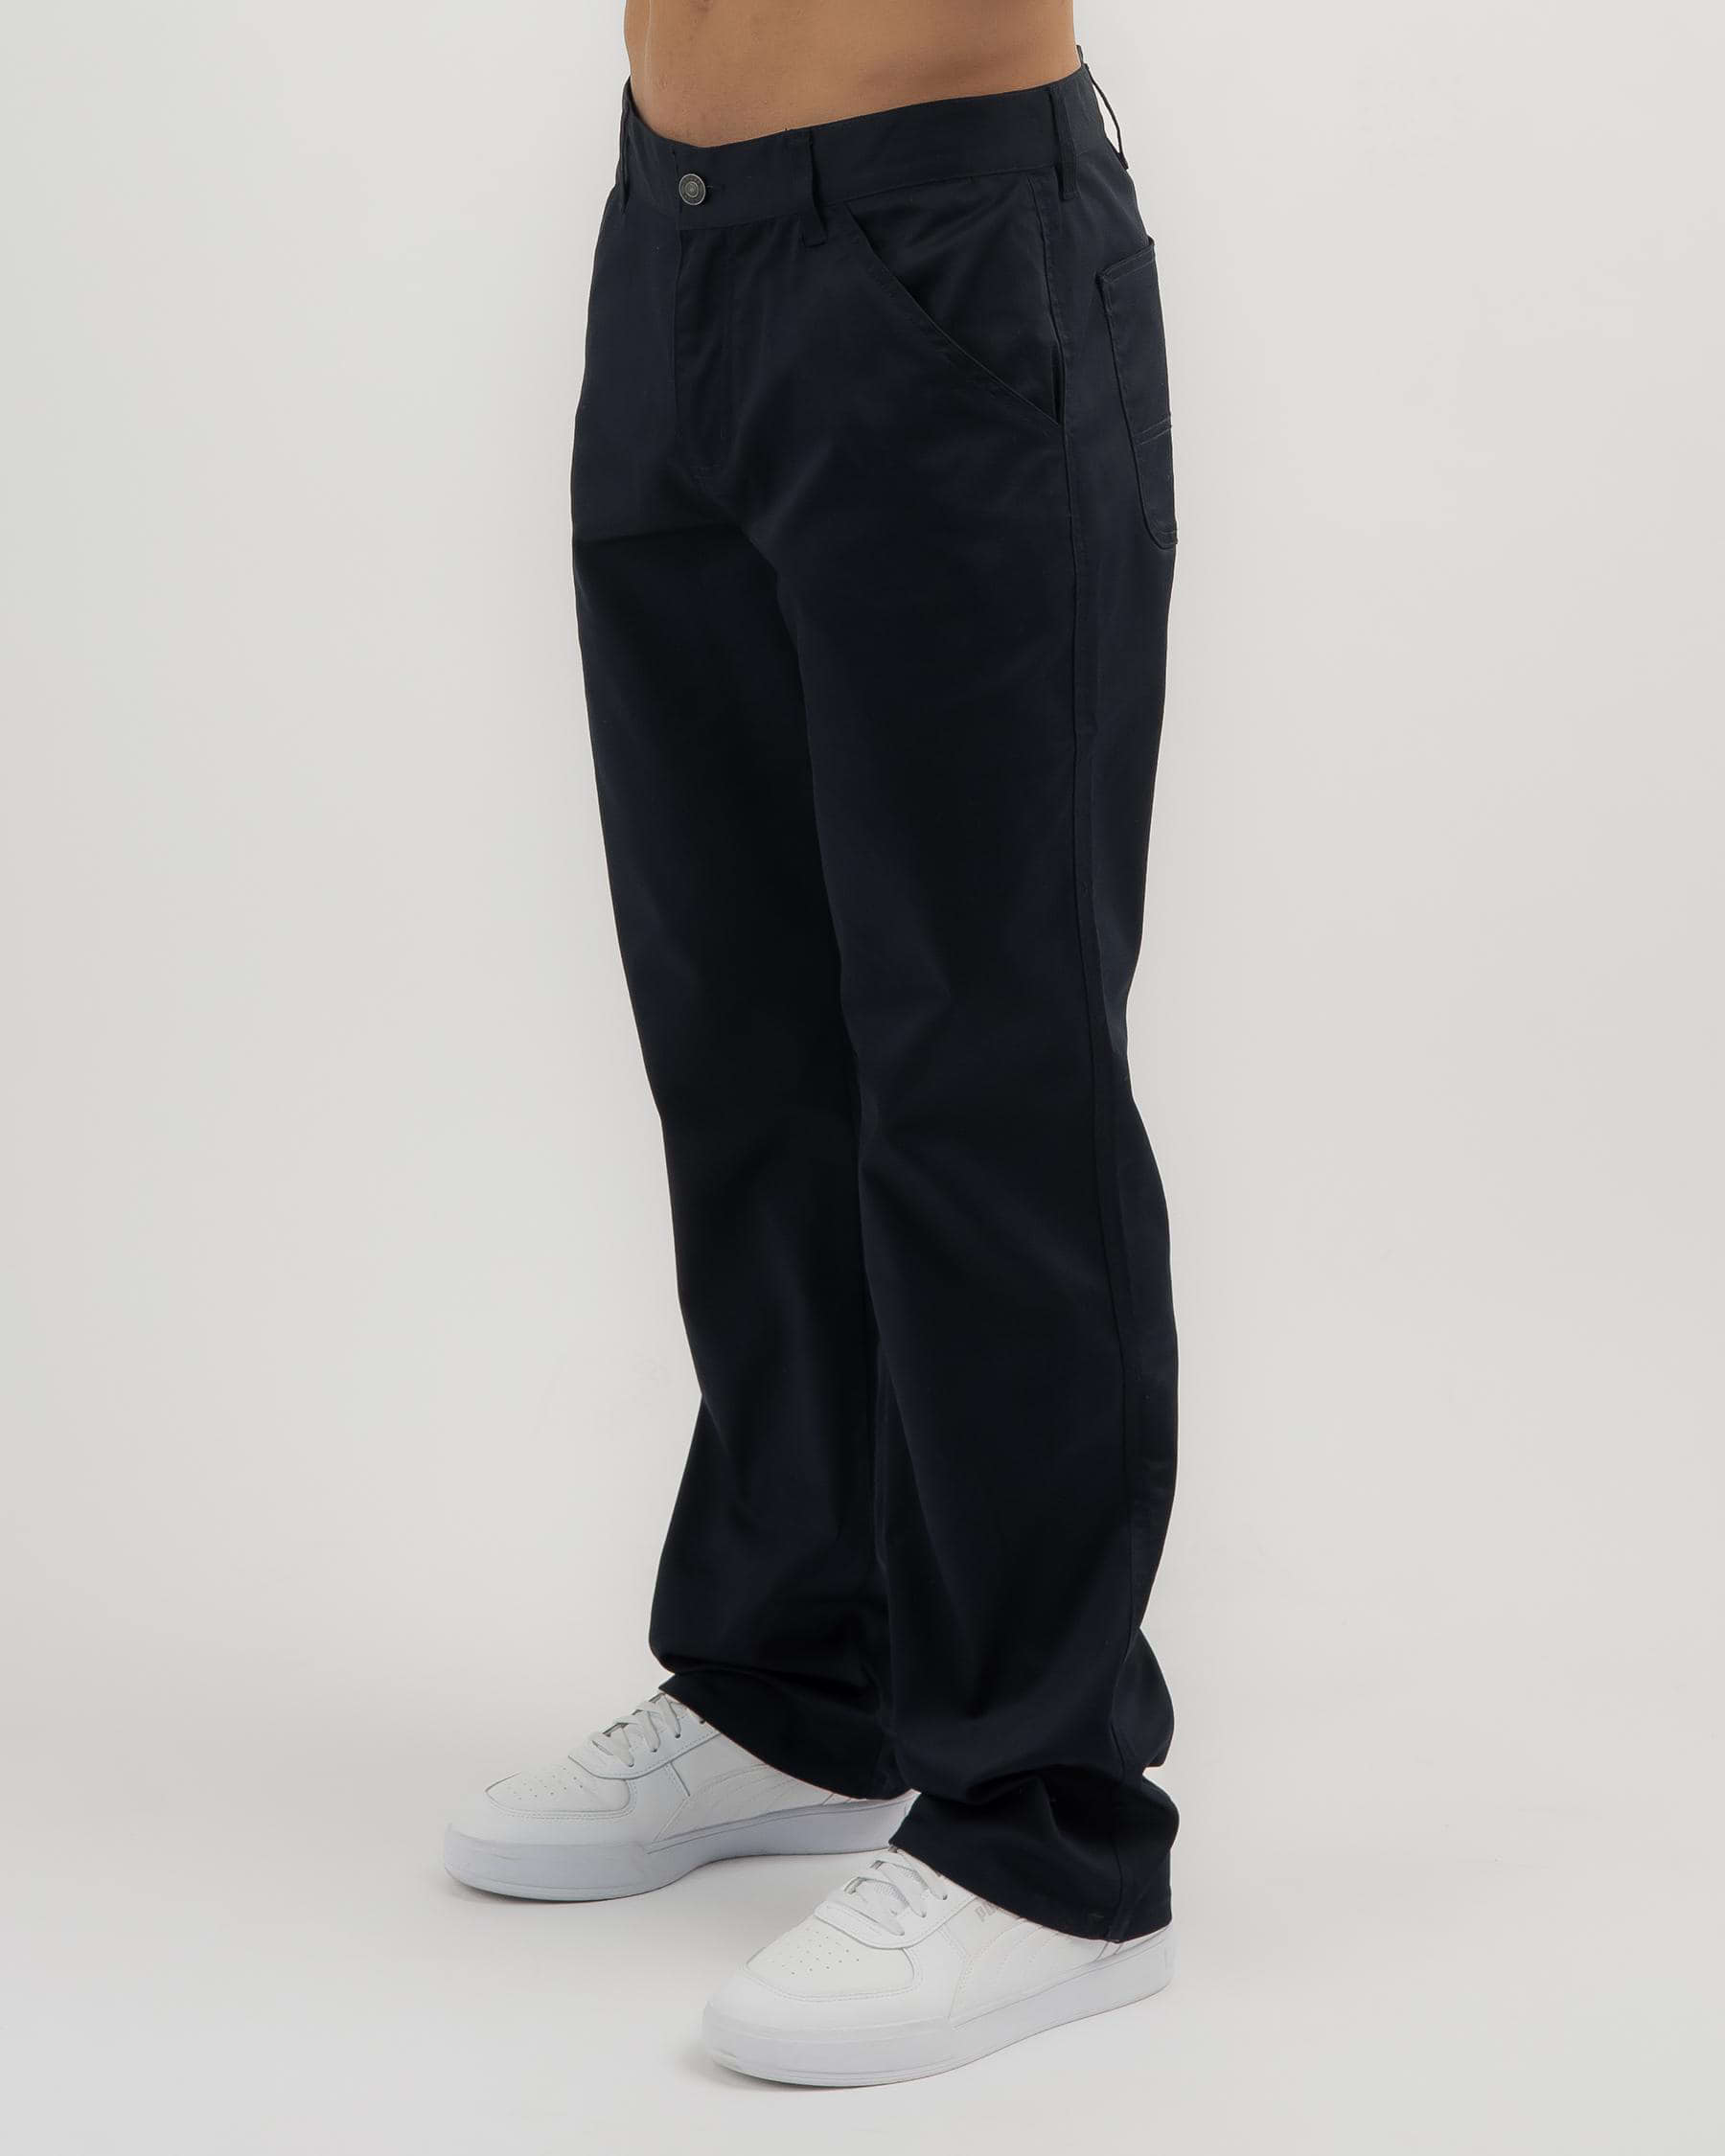 Dexter Swelter Pants In Navy - Fast Shipping & Easy Returns - City ...